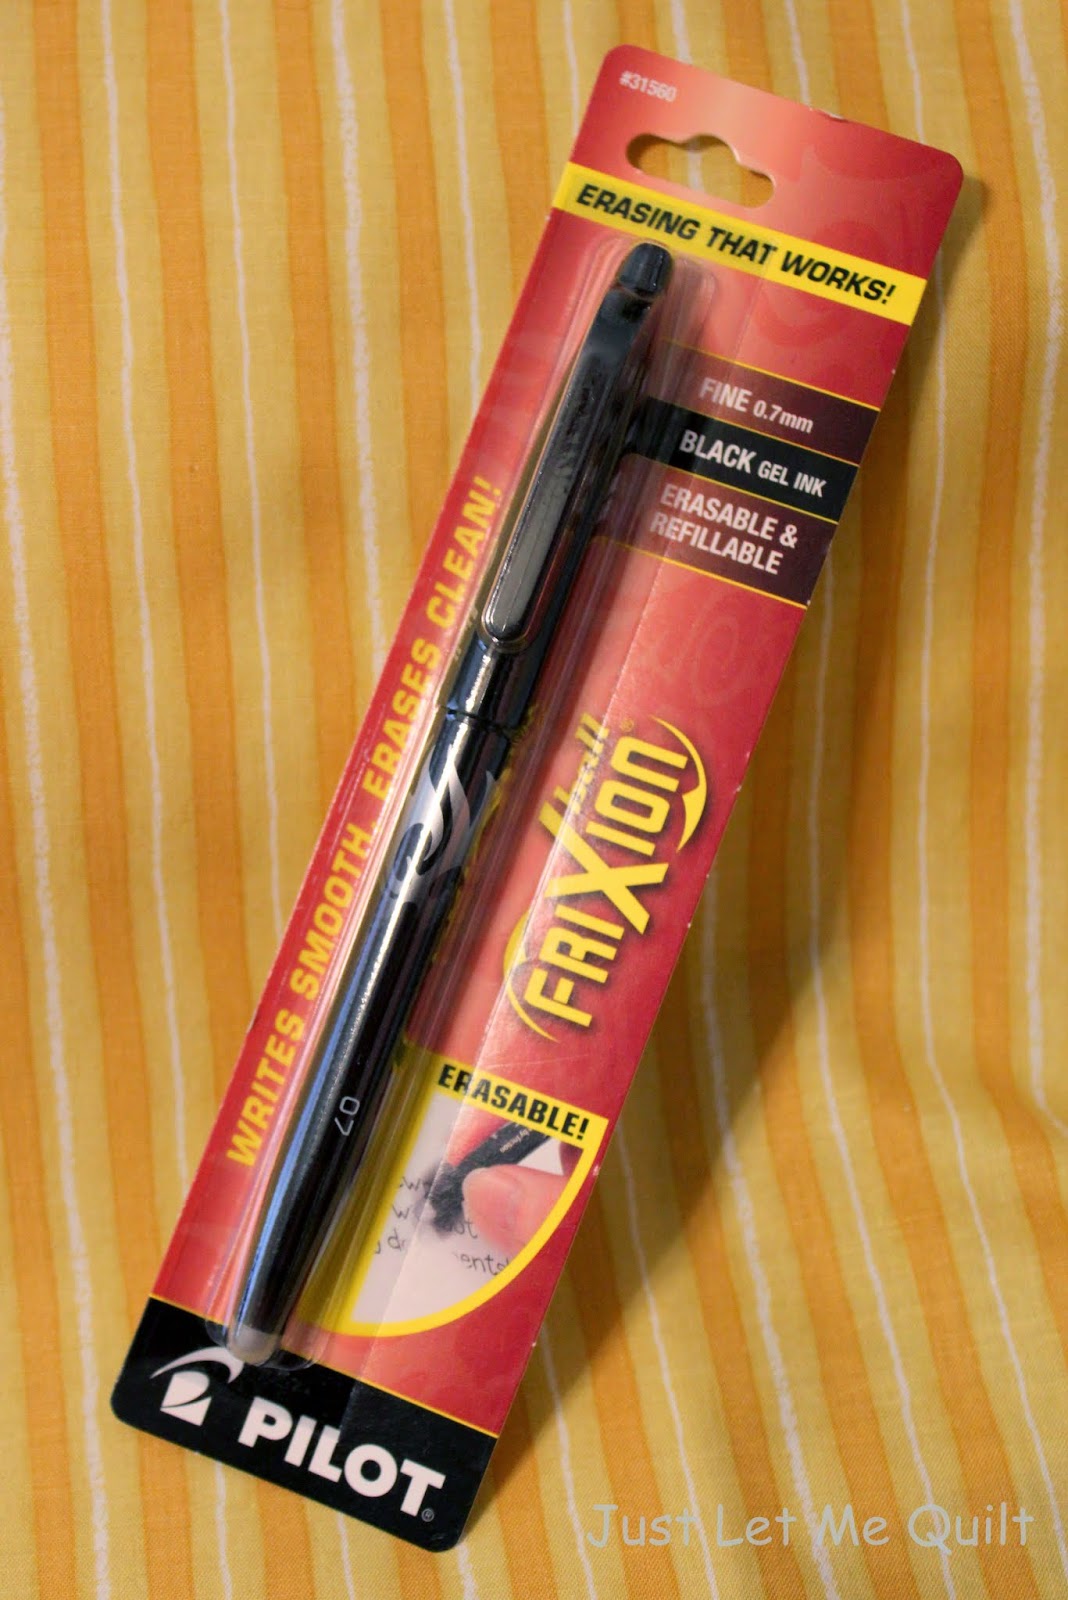  Frixion Heat Erasable Pens For Quilting